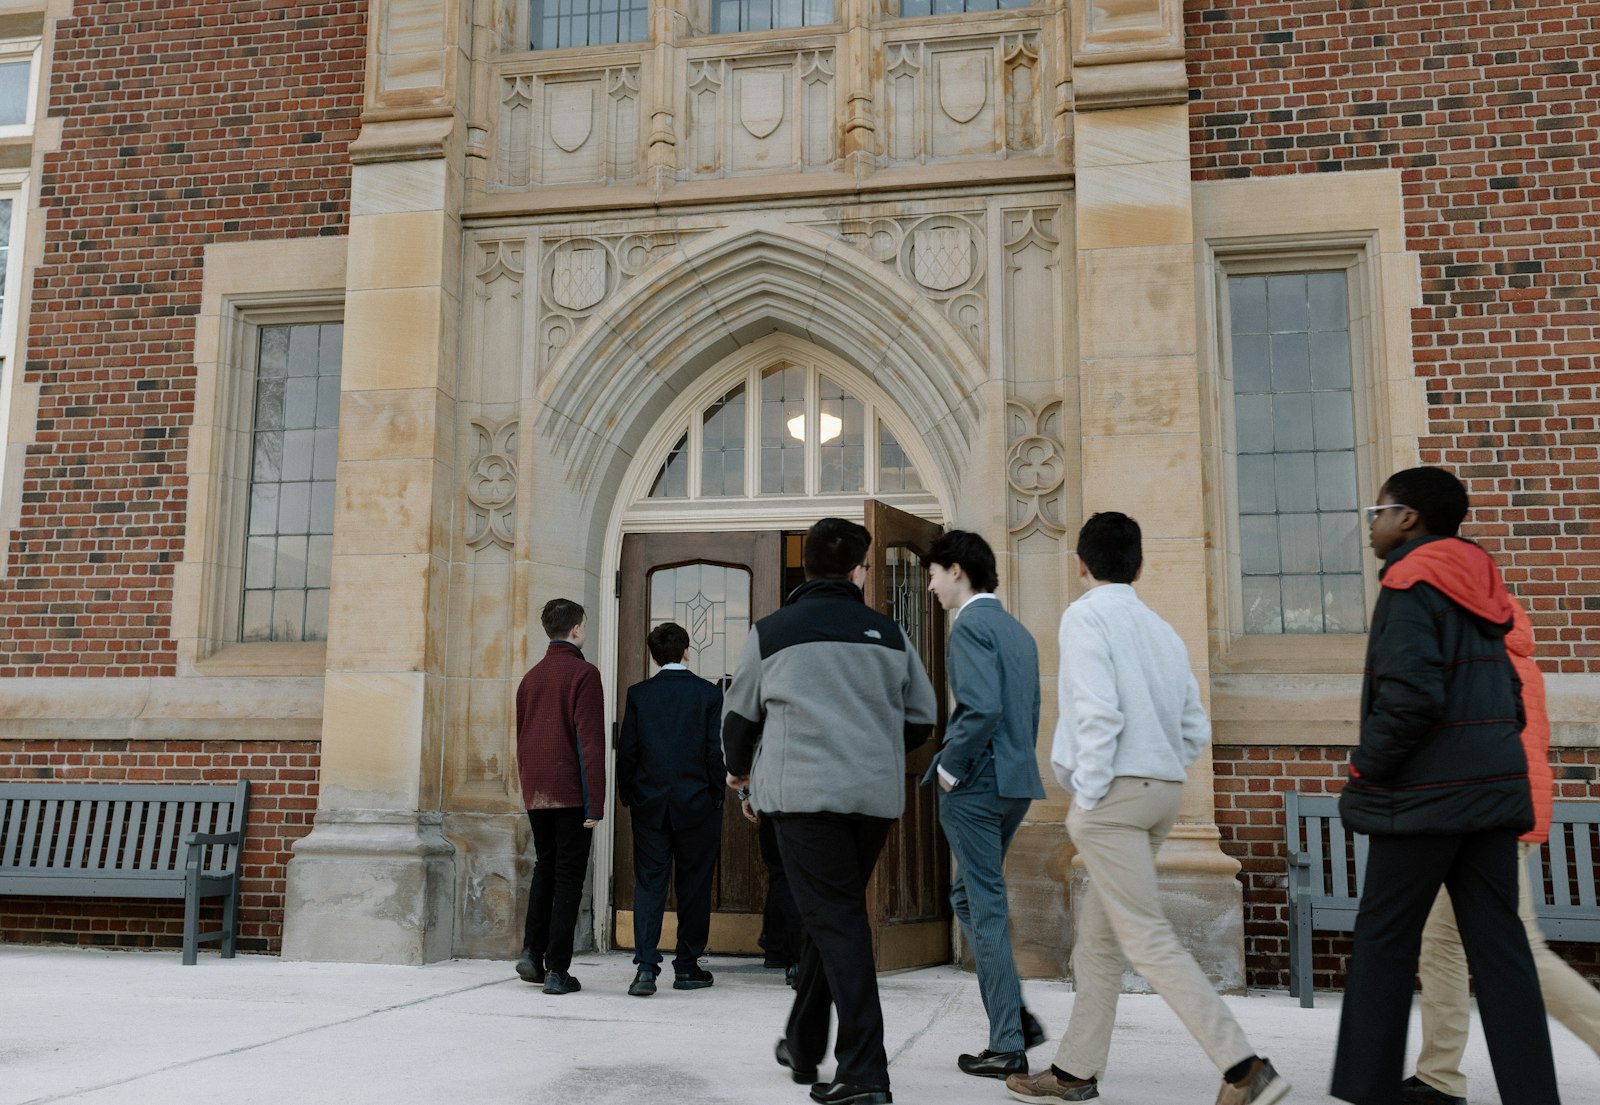 Young men file into the doors of Sacred Heart Major Seminary. Fr. Craig Giera, director of priestly vocations for the Archdiocese of Detroit, said the evening was about dispelling misconceptions about seminary life and priestly discernment, and encouraging young people to seek God's plan in prayer.